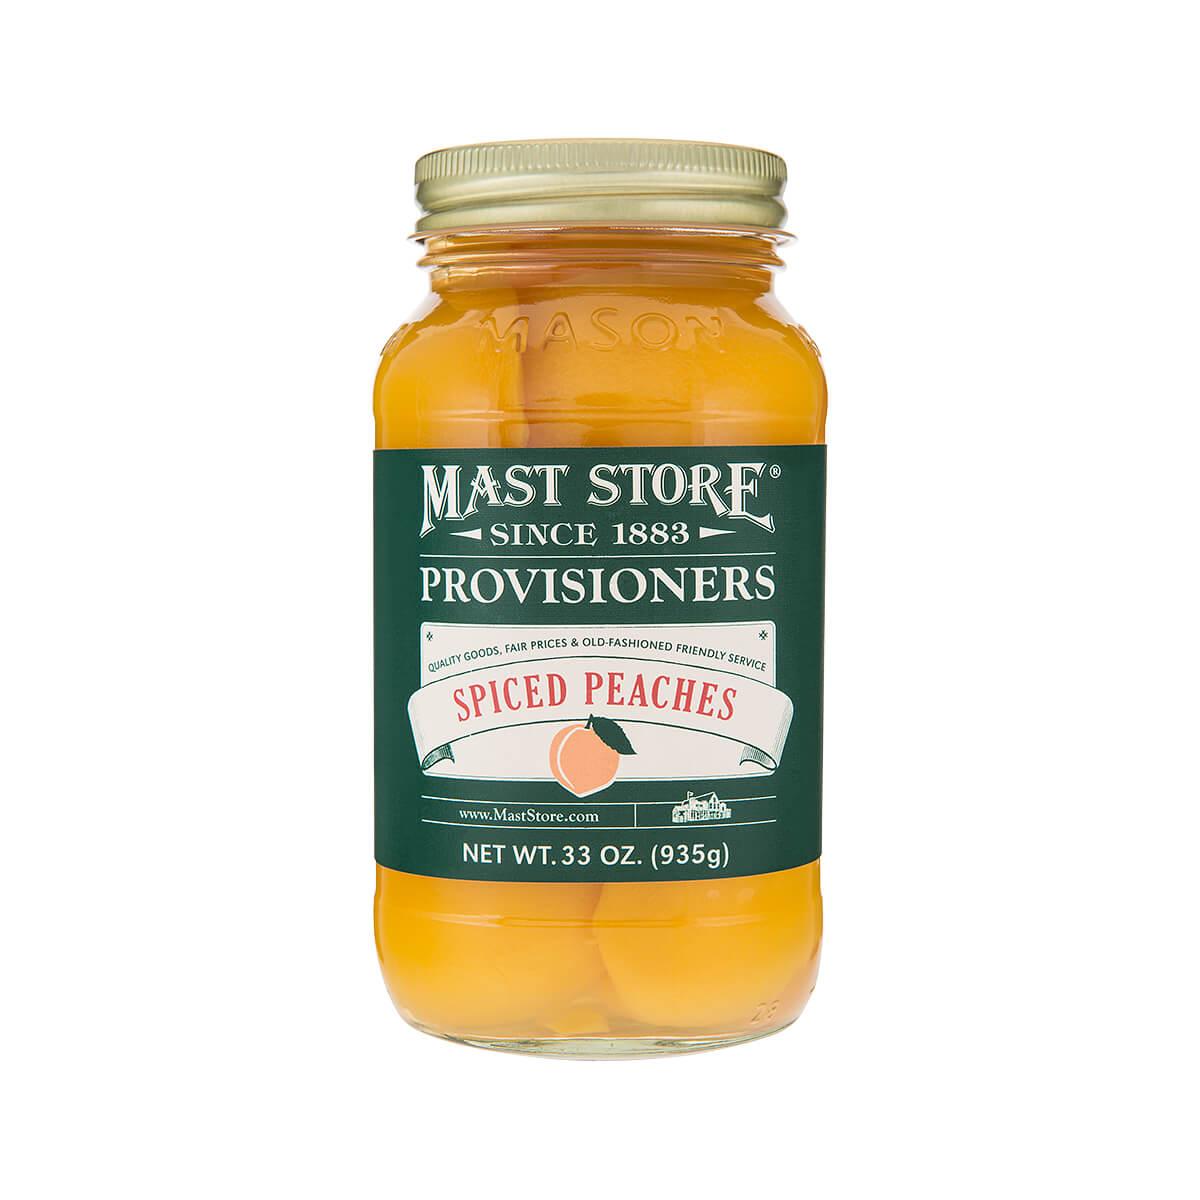  Mast Store Provisioners Spiced Peaches